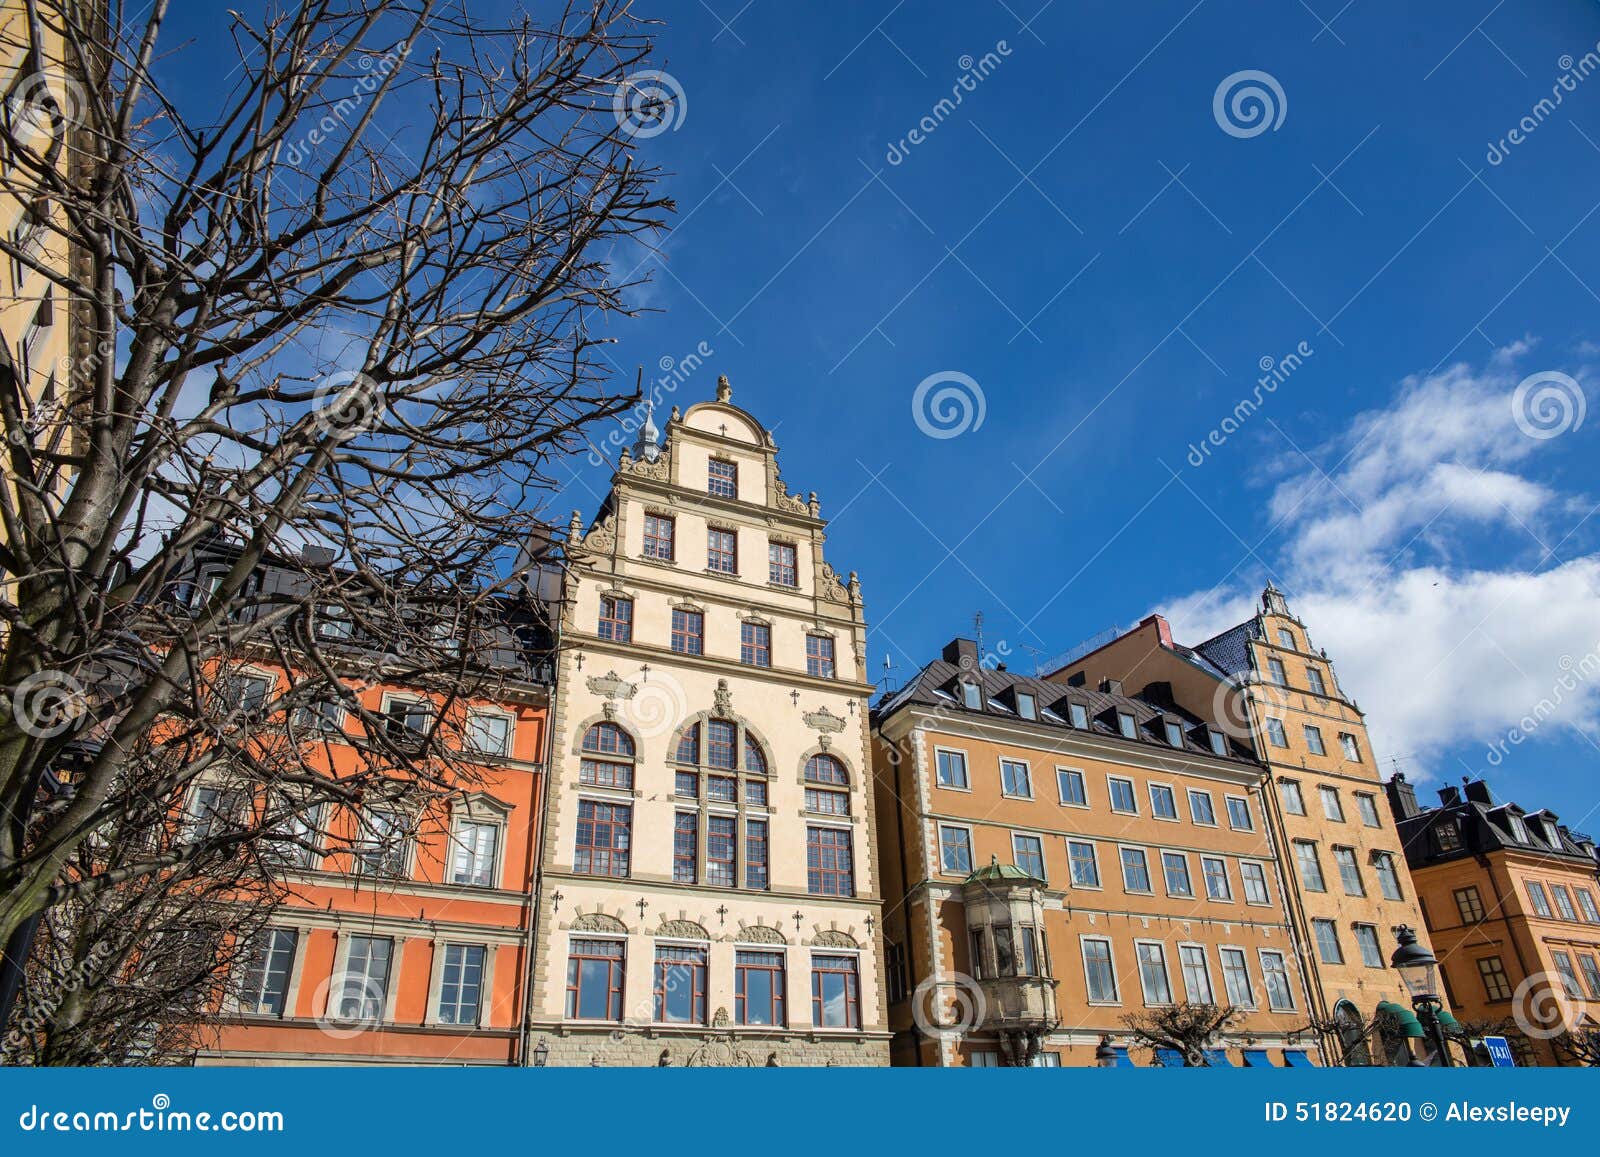 buildings in the city center of stockholm